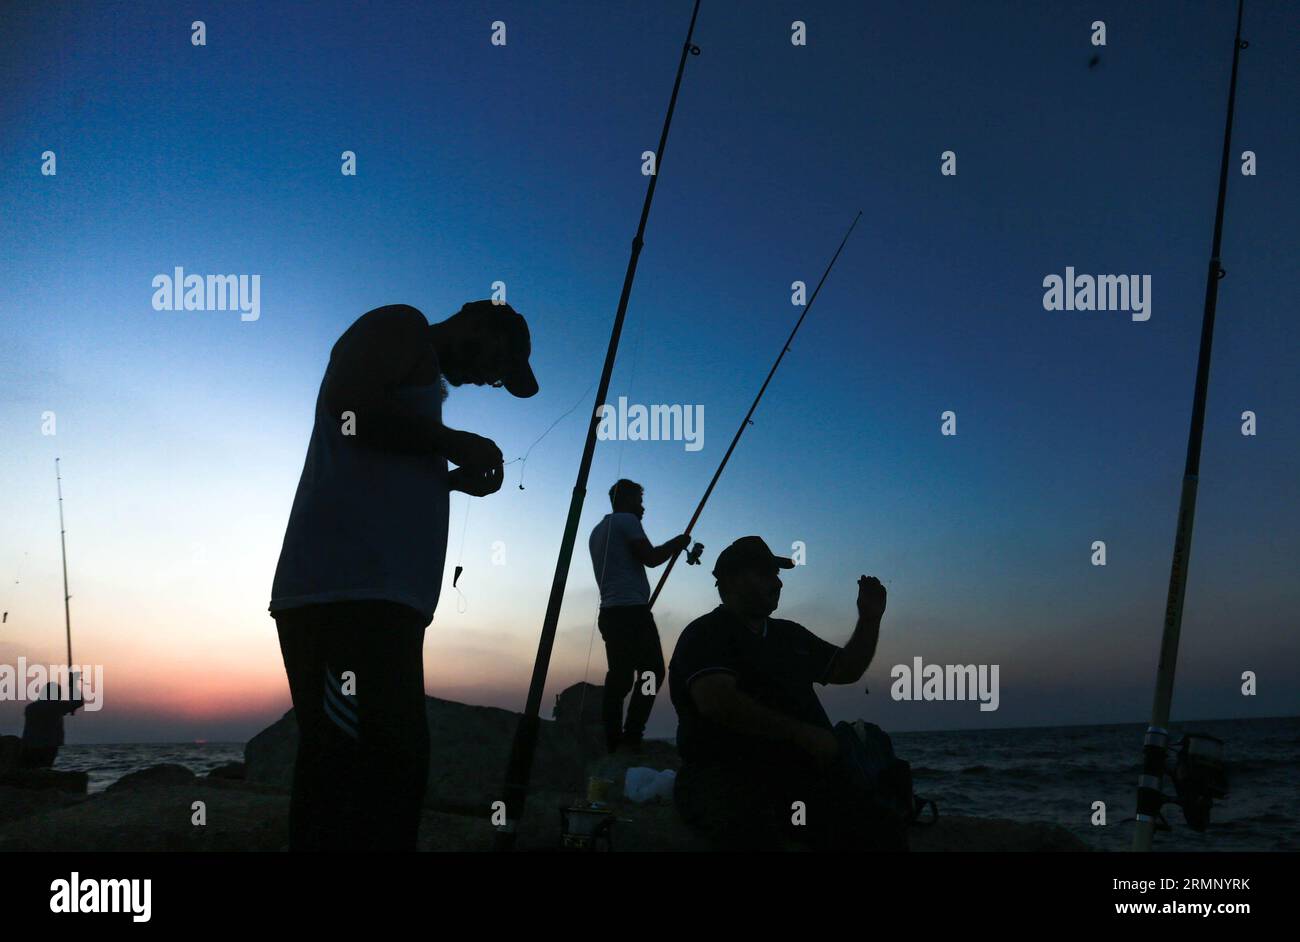 https://c8.alamy.com/comp/2RMNYRK/palestinian-men-use-fishing-rods-to-catch-fish-during-sunset-on-the-seashore-in-the-northern-gaza-strip-2RMNYRK.jpg